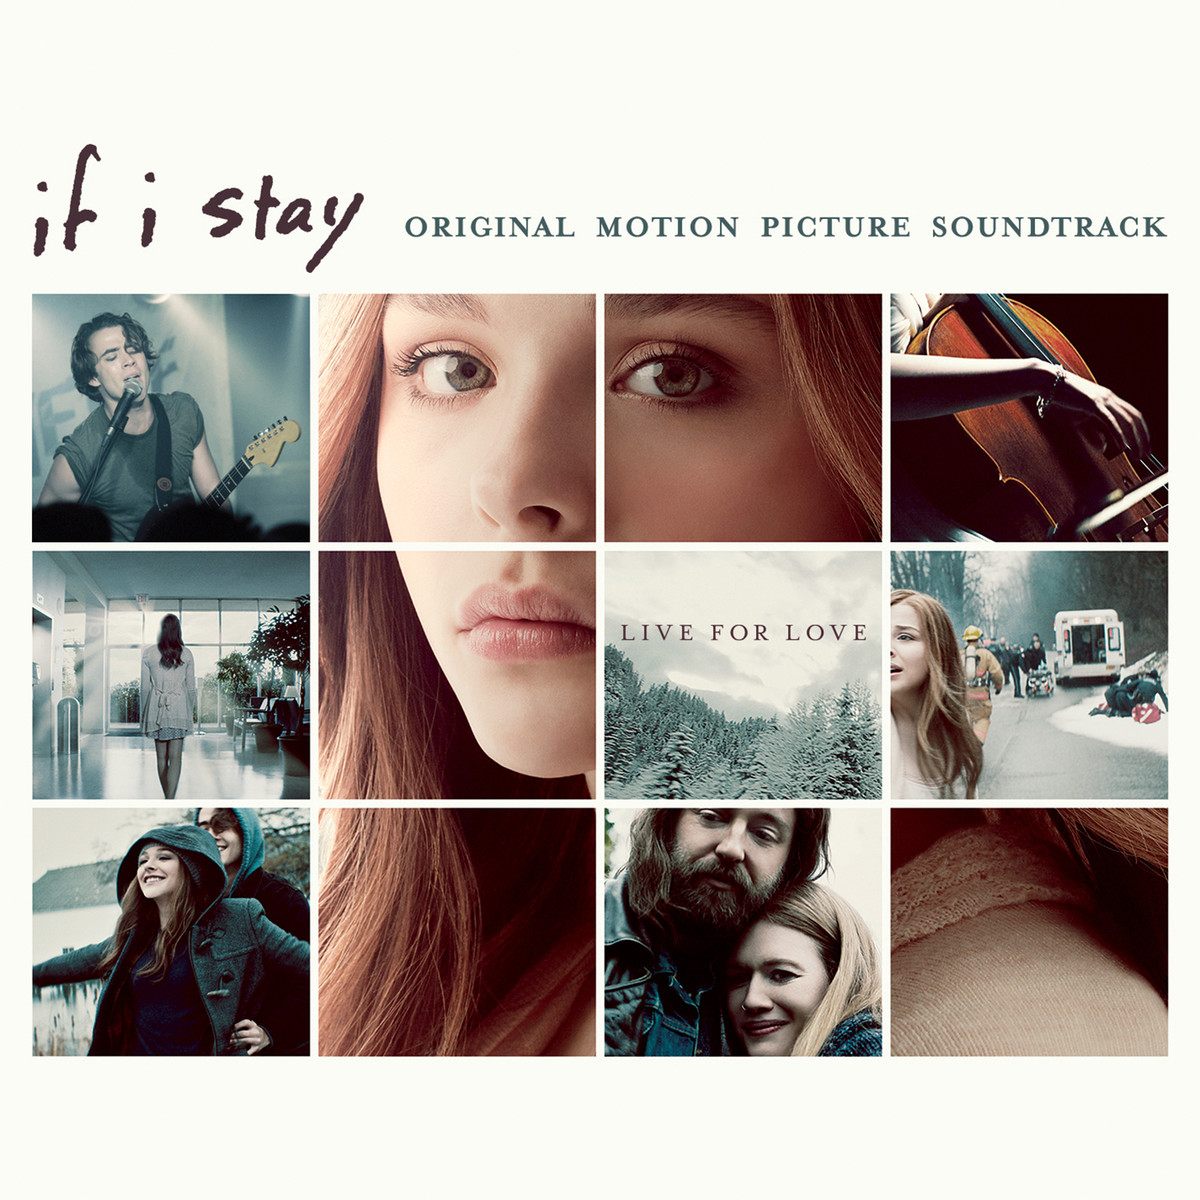 Cello if i stay soundtrack torrent igniting the compound effect torrent